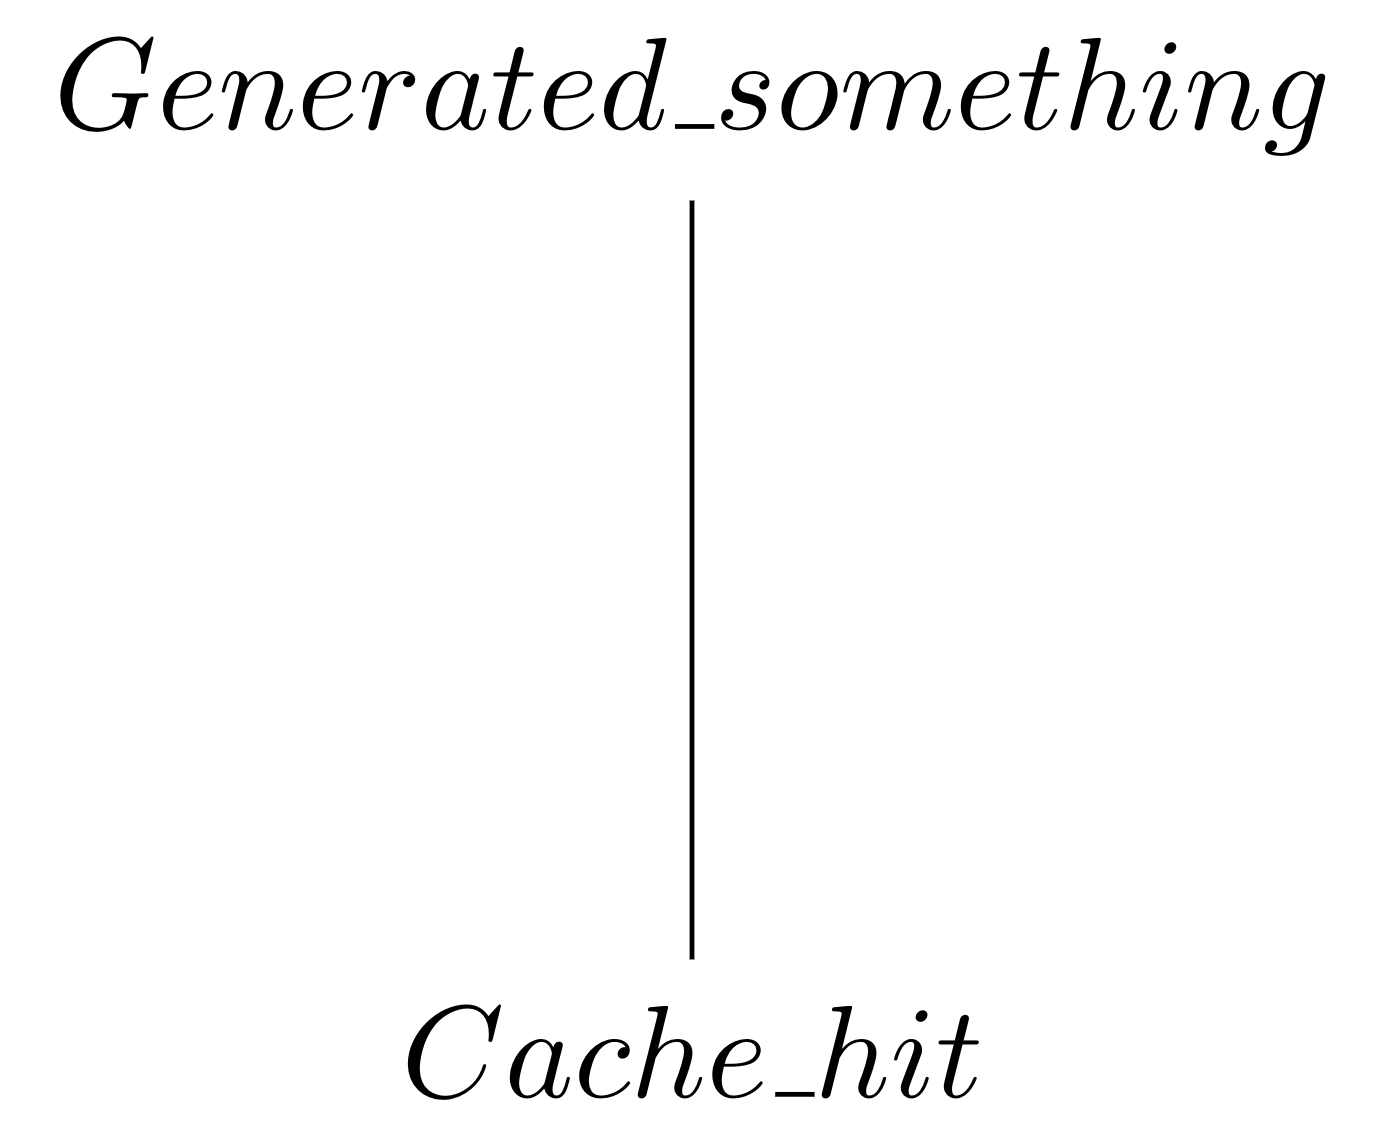 Semilattice cache_hit at the bottom generated_something at the top